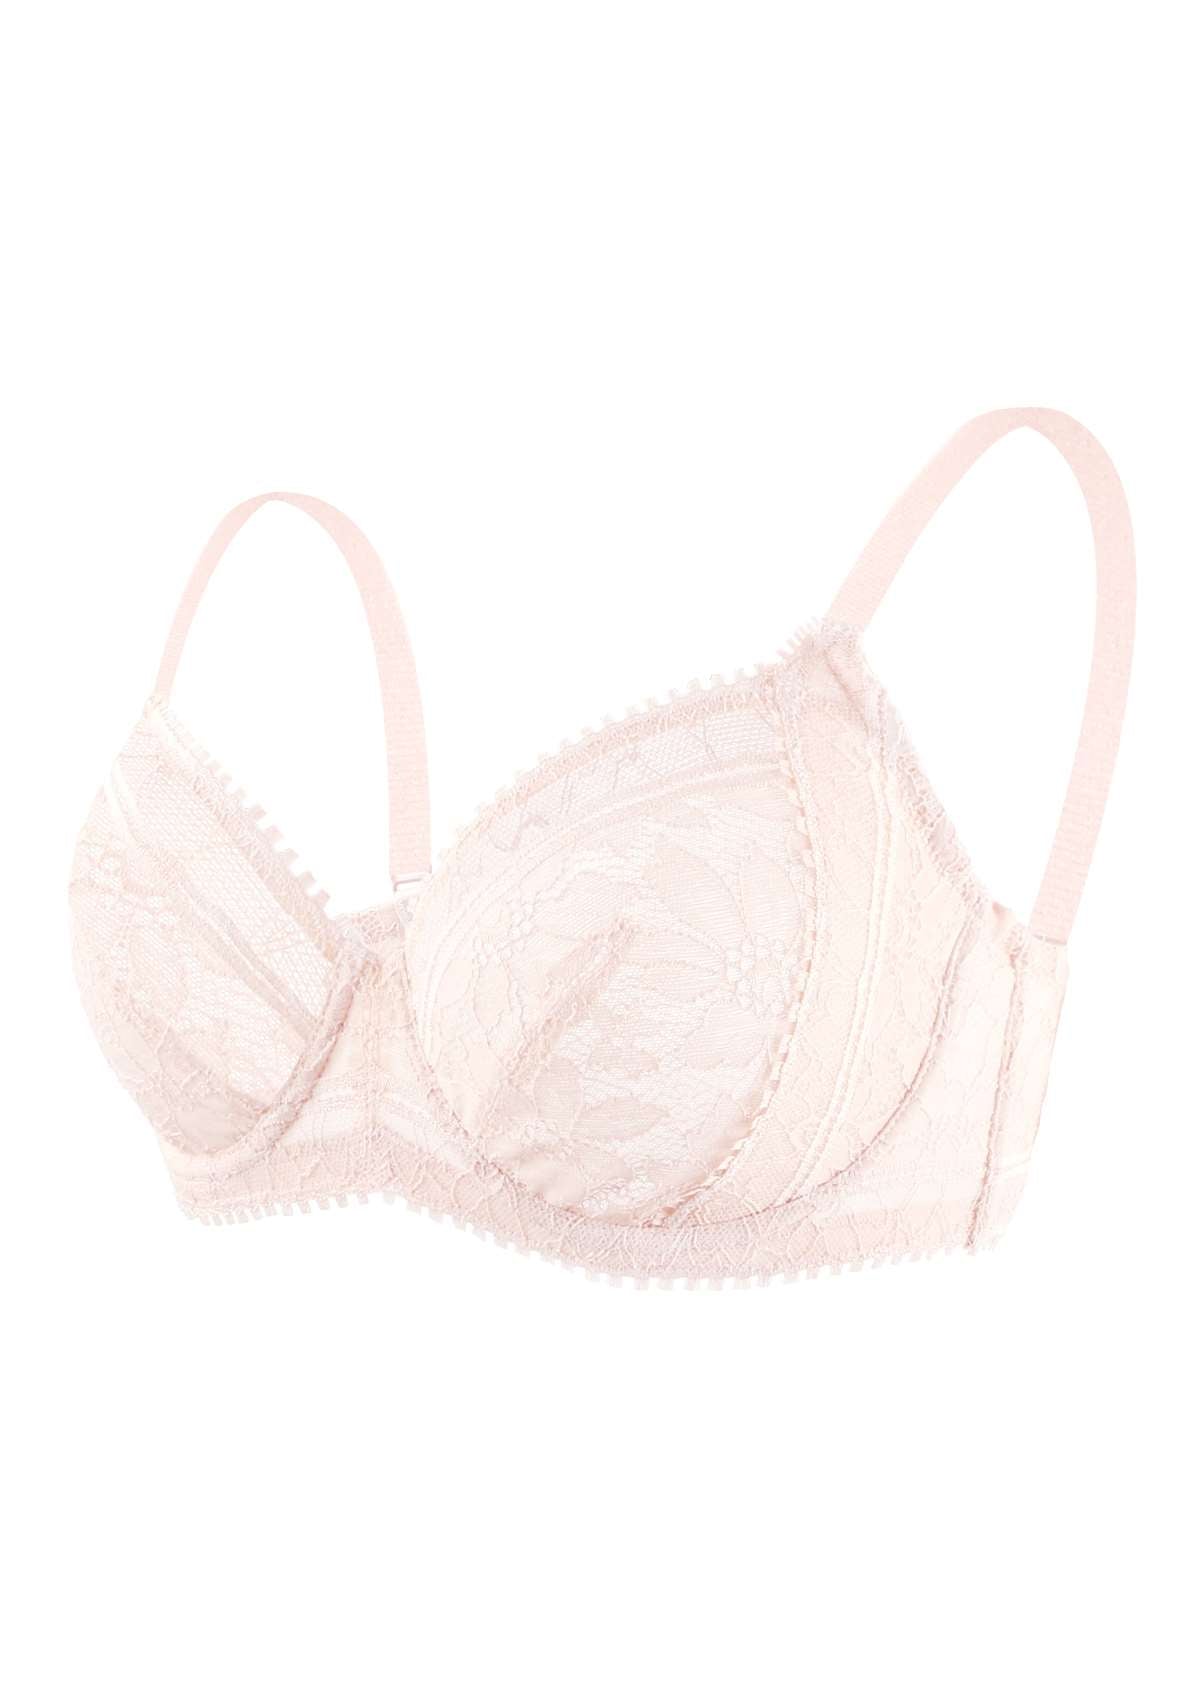 HSIA Silene Floral Delicate Unlined Lace Soft Cup Uplift Bra - Heavenly Pink / 40 / DD/E